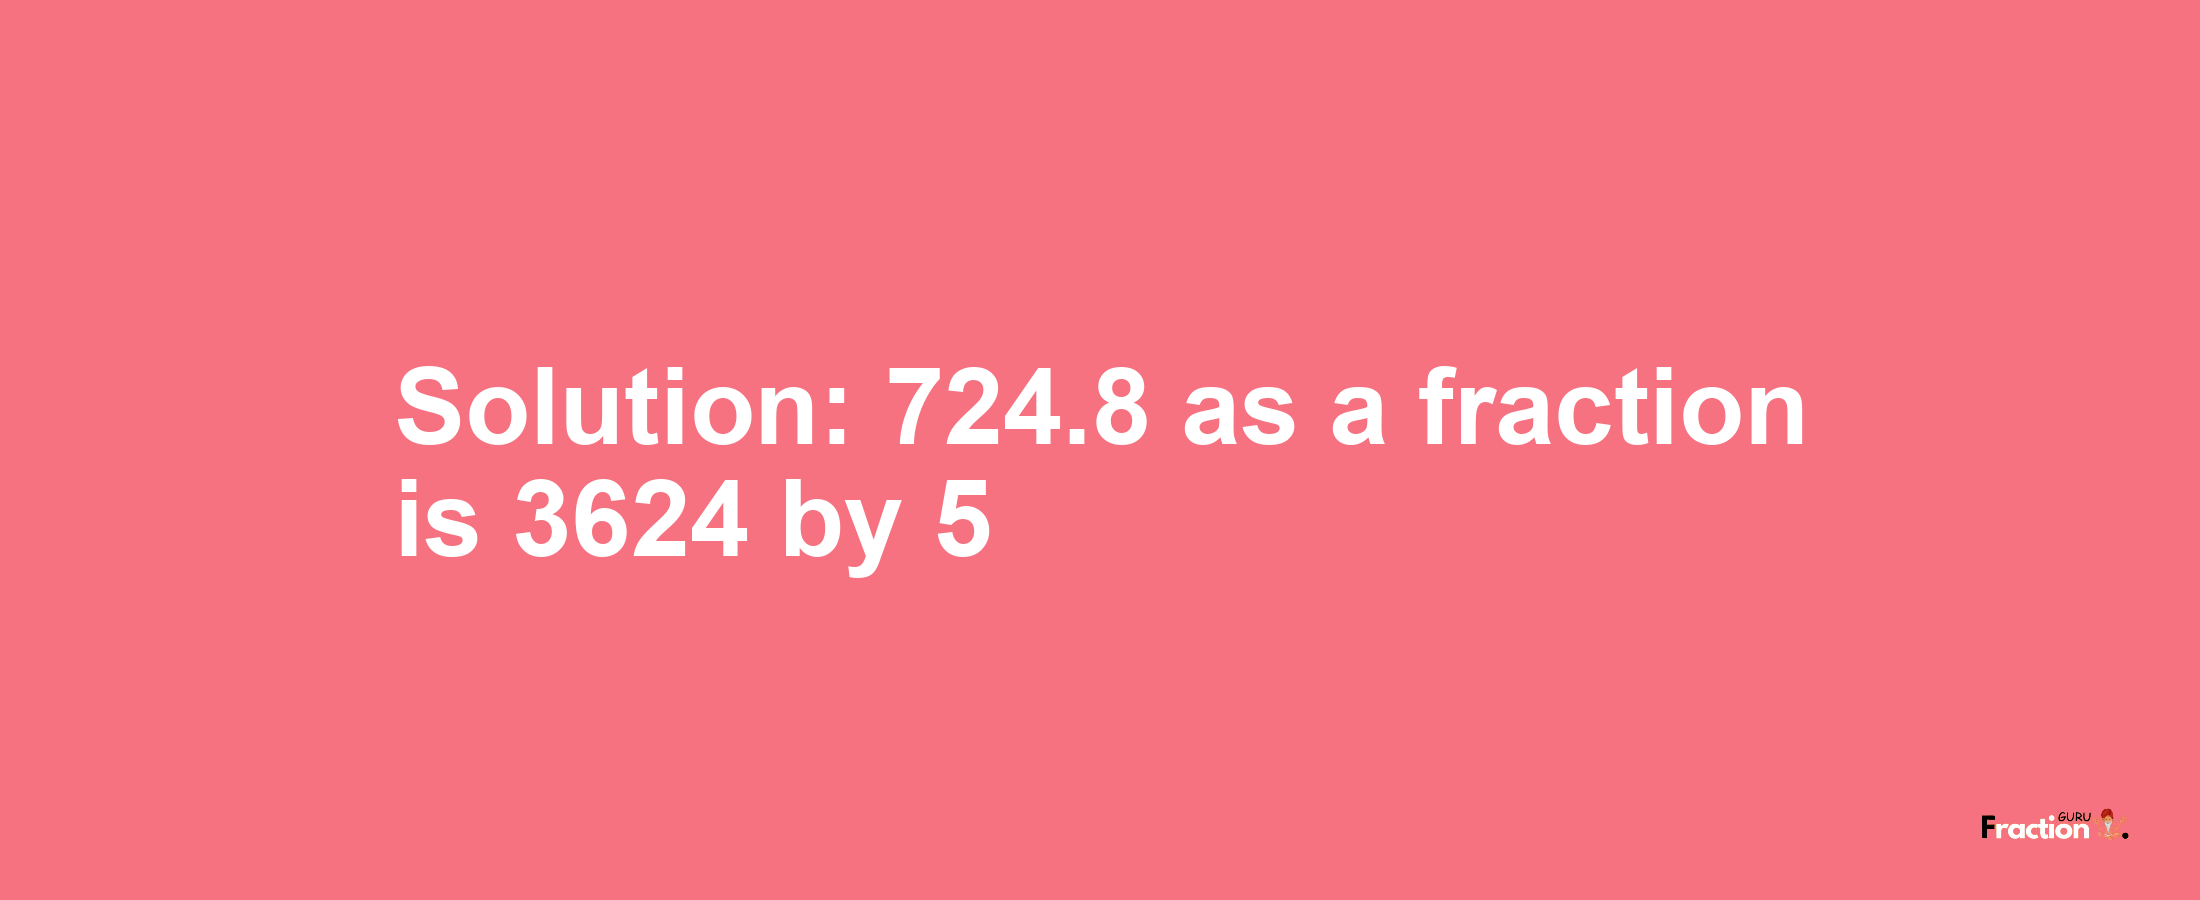 Solution:724.8 as a fraction is 3624/5